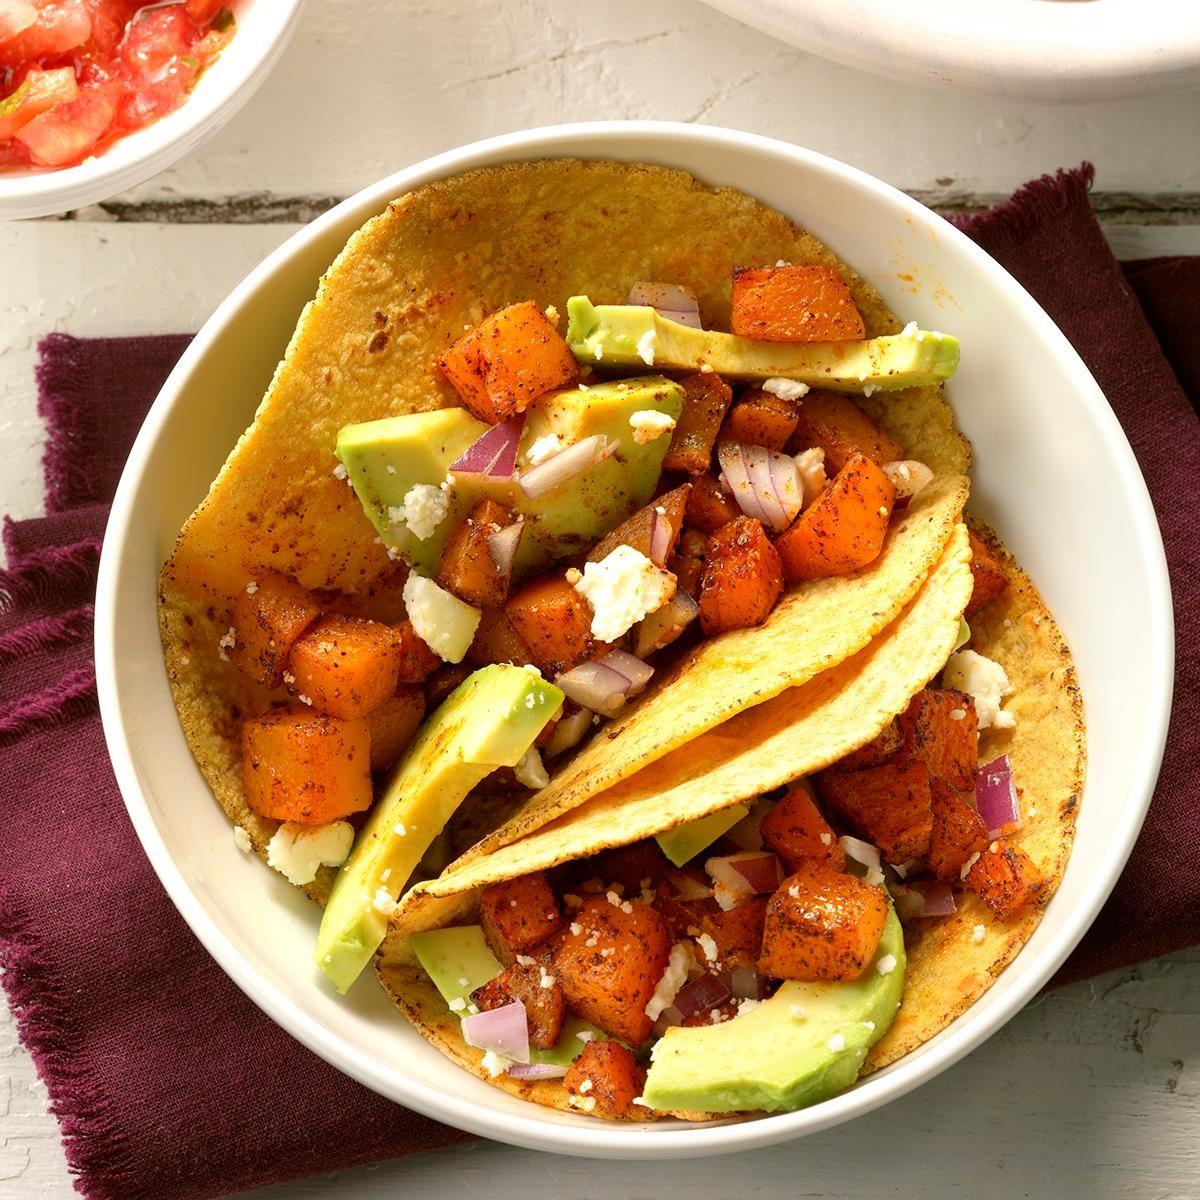 Day 4 Dinner: Roasted Butternut Squash Tacos